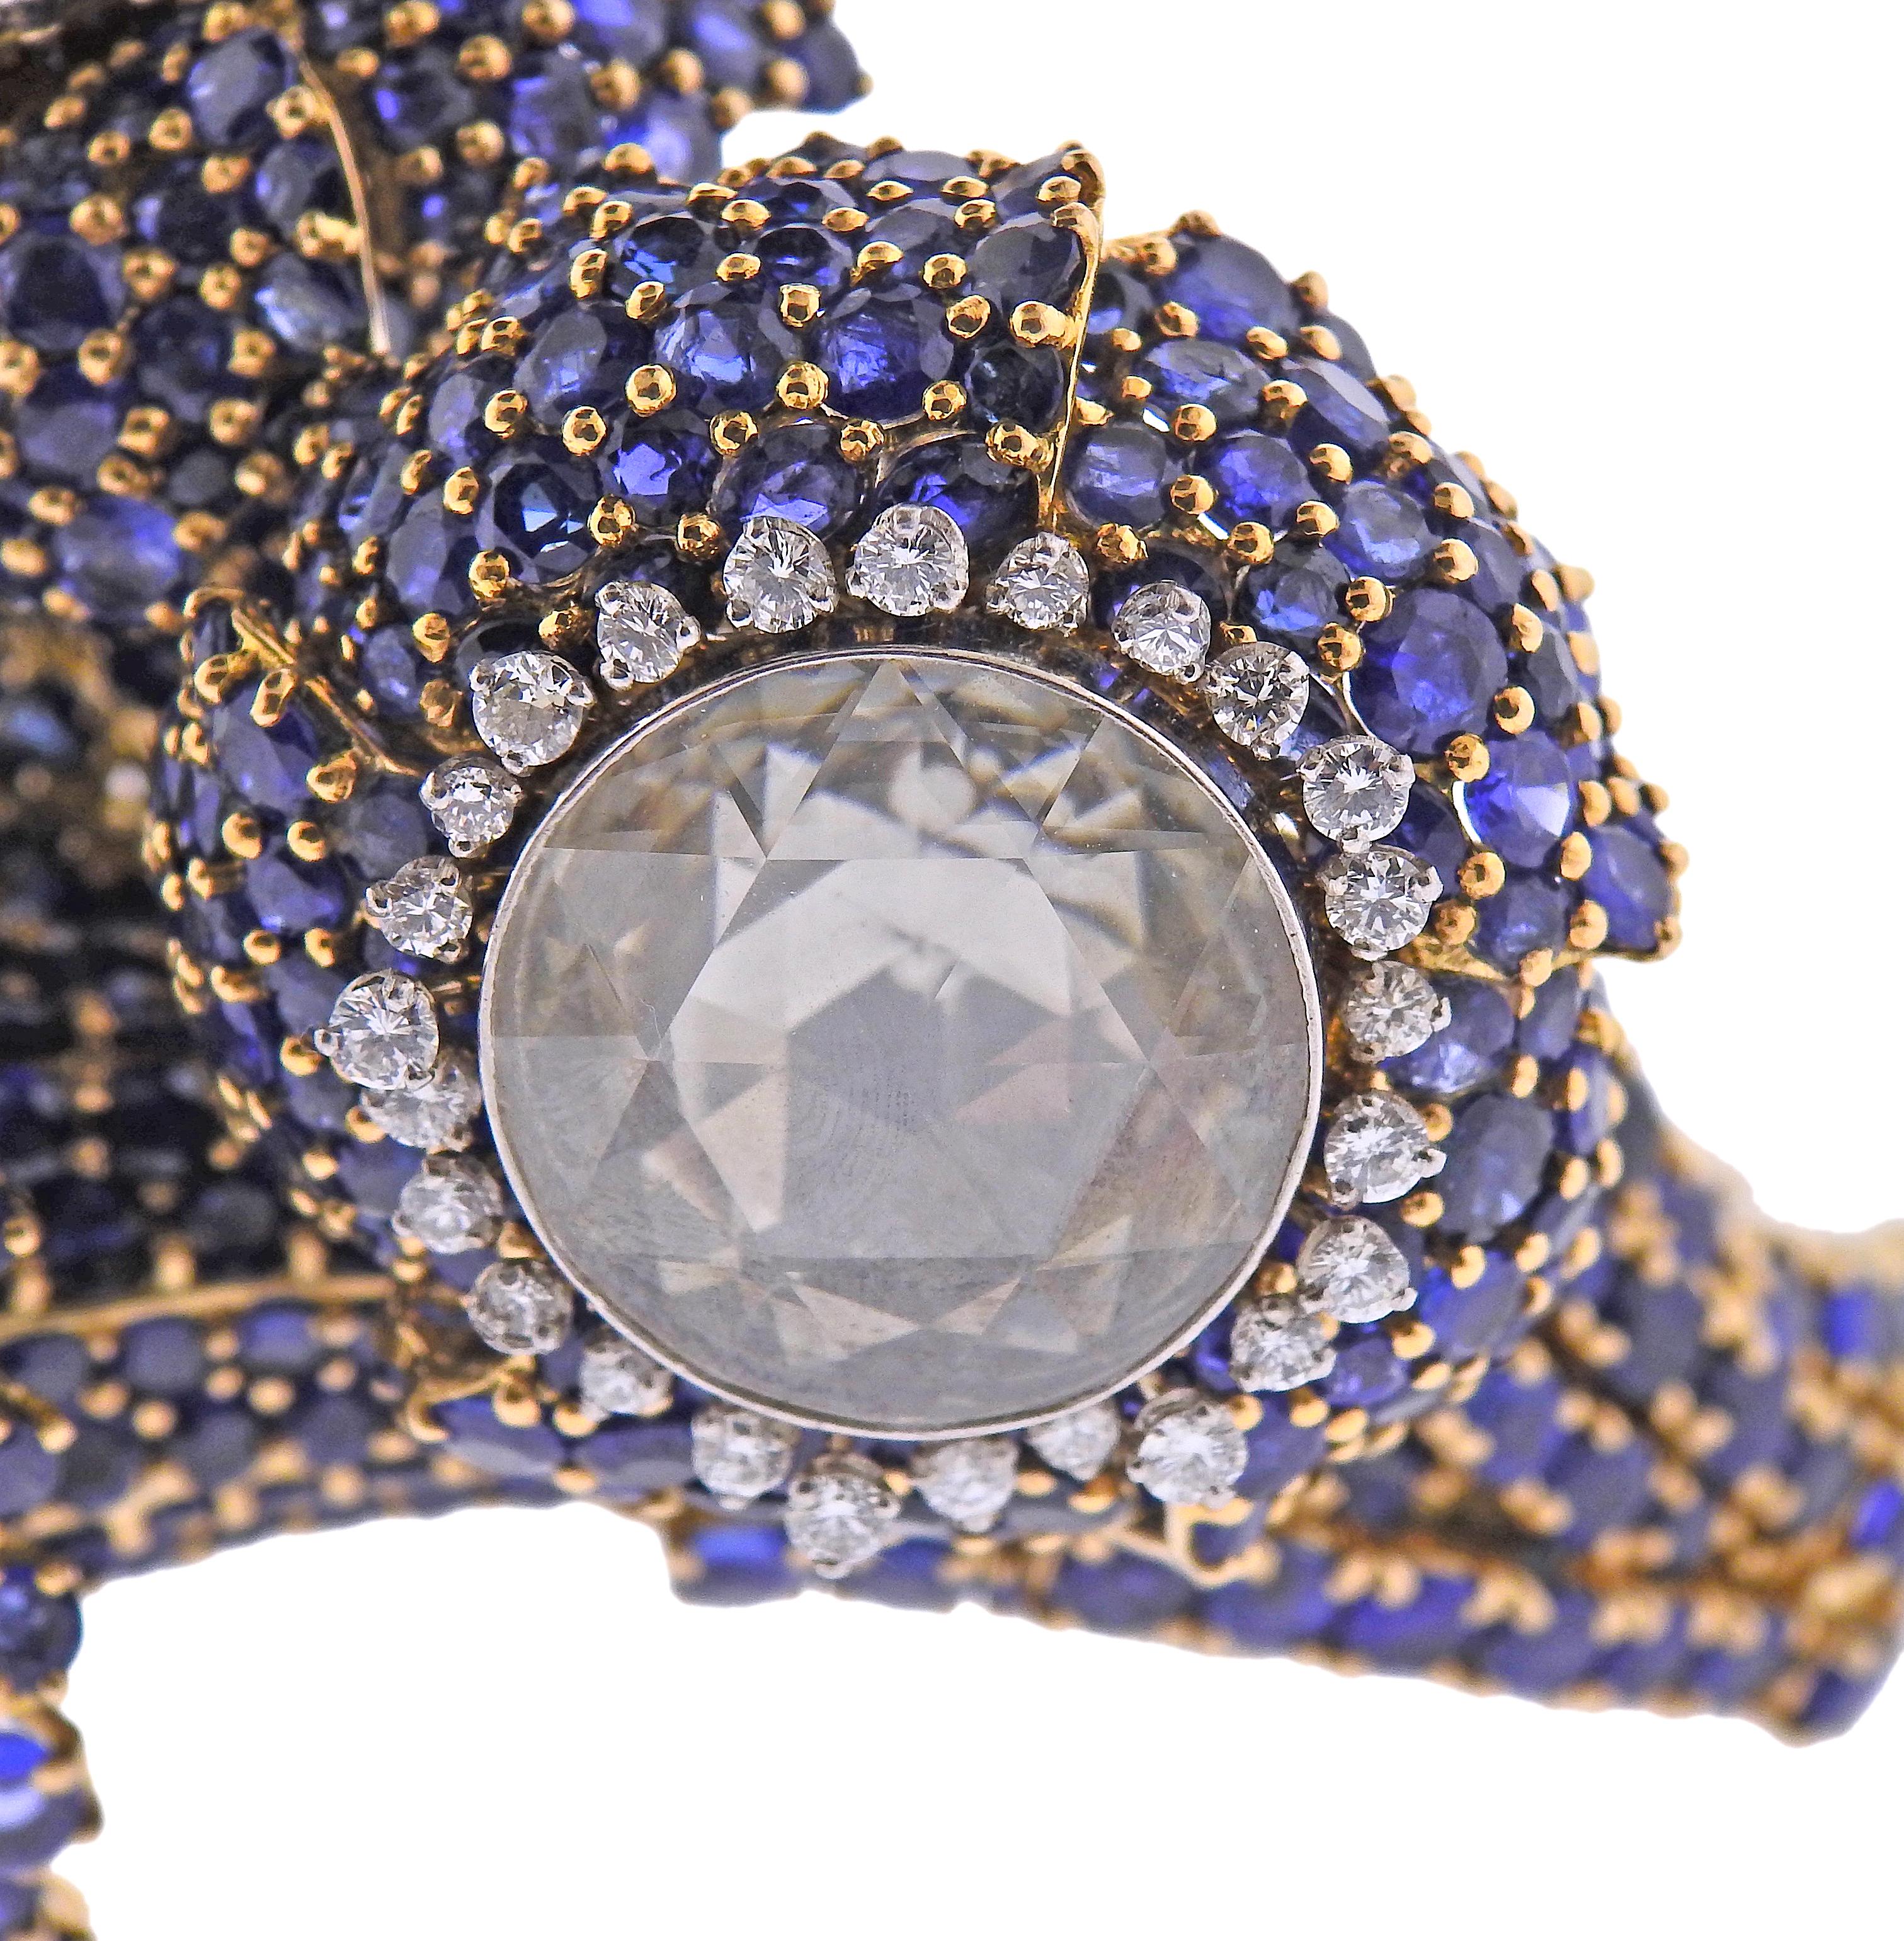 Gorgeous large 18k gold bangle bracelet by David Webb, with three rose cut diamonds - measuring 17.1mm ; 20.2mm and 18.5mm in diameter. Surrounded with vibrant blue sapphires and approx. 1.50ctw in round diamonds. Bracelet will fit average/medium